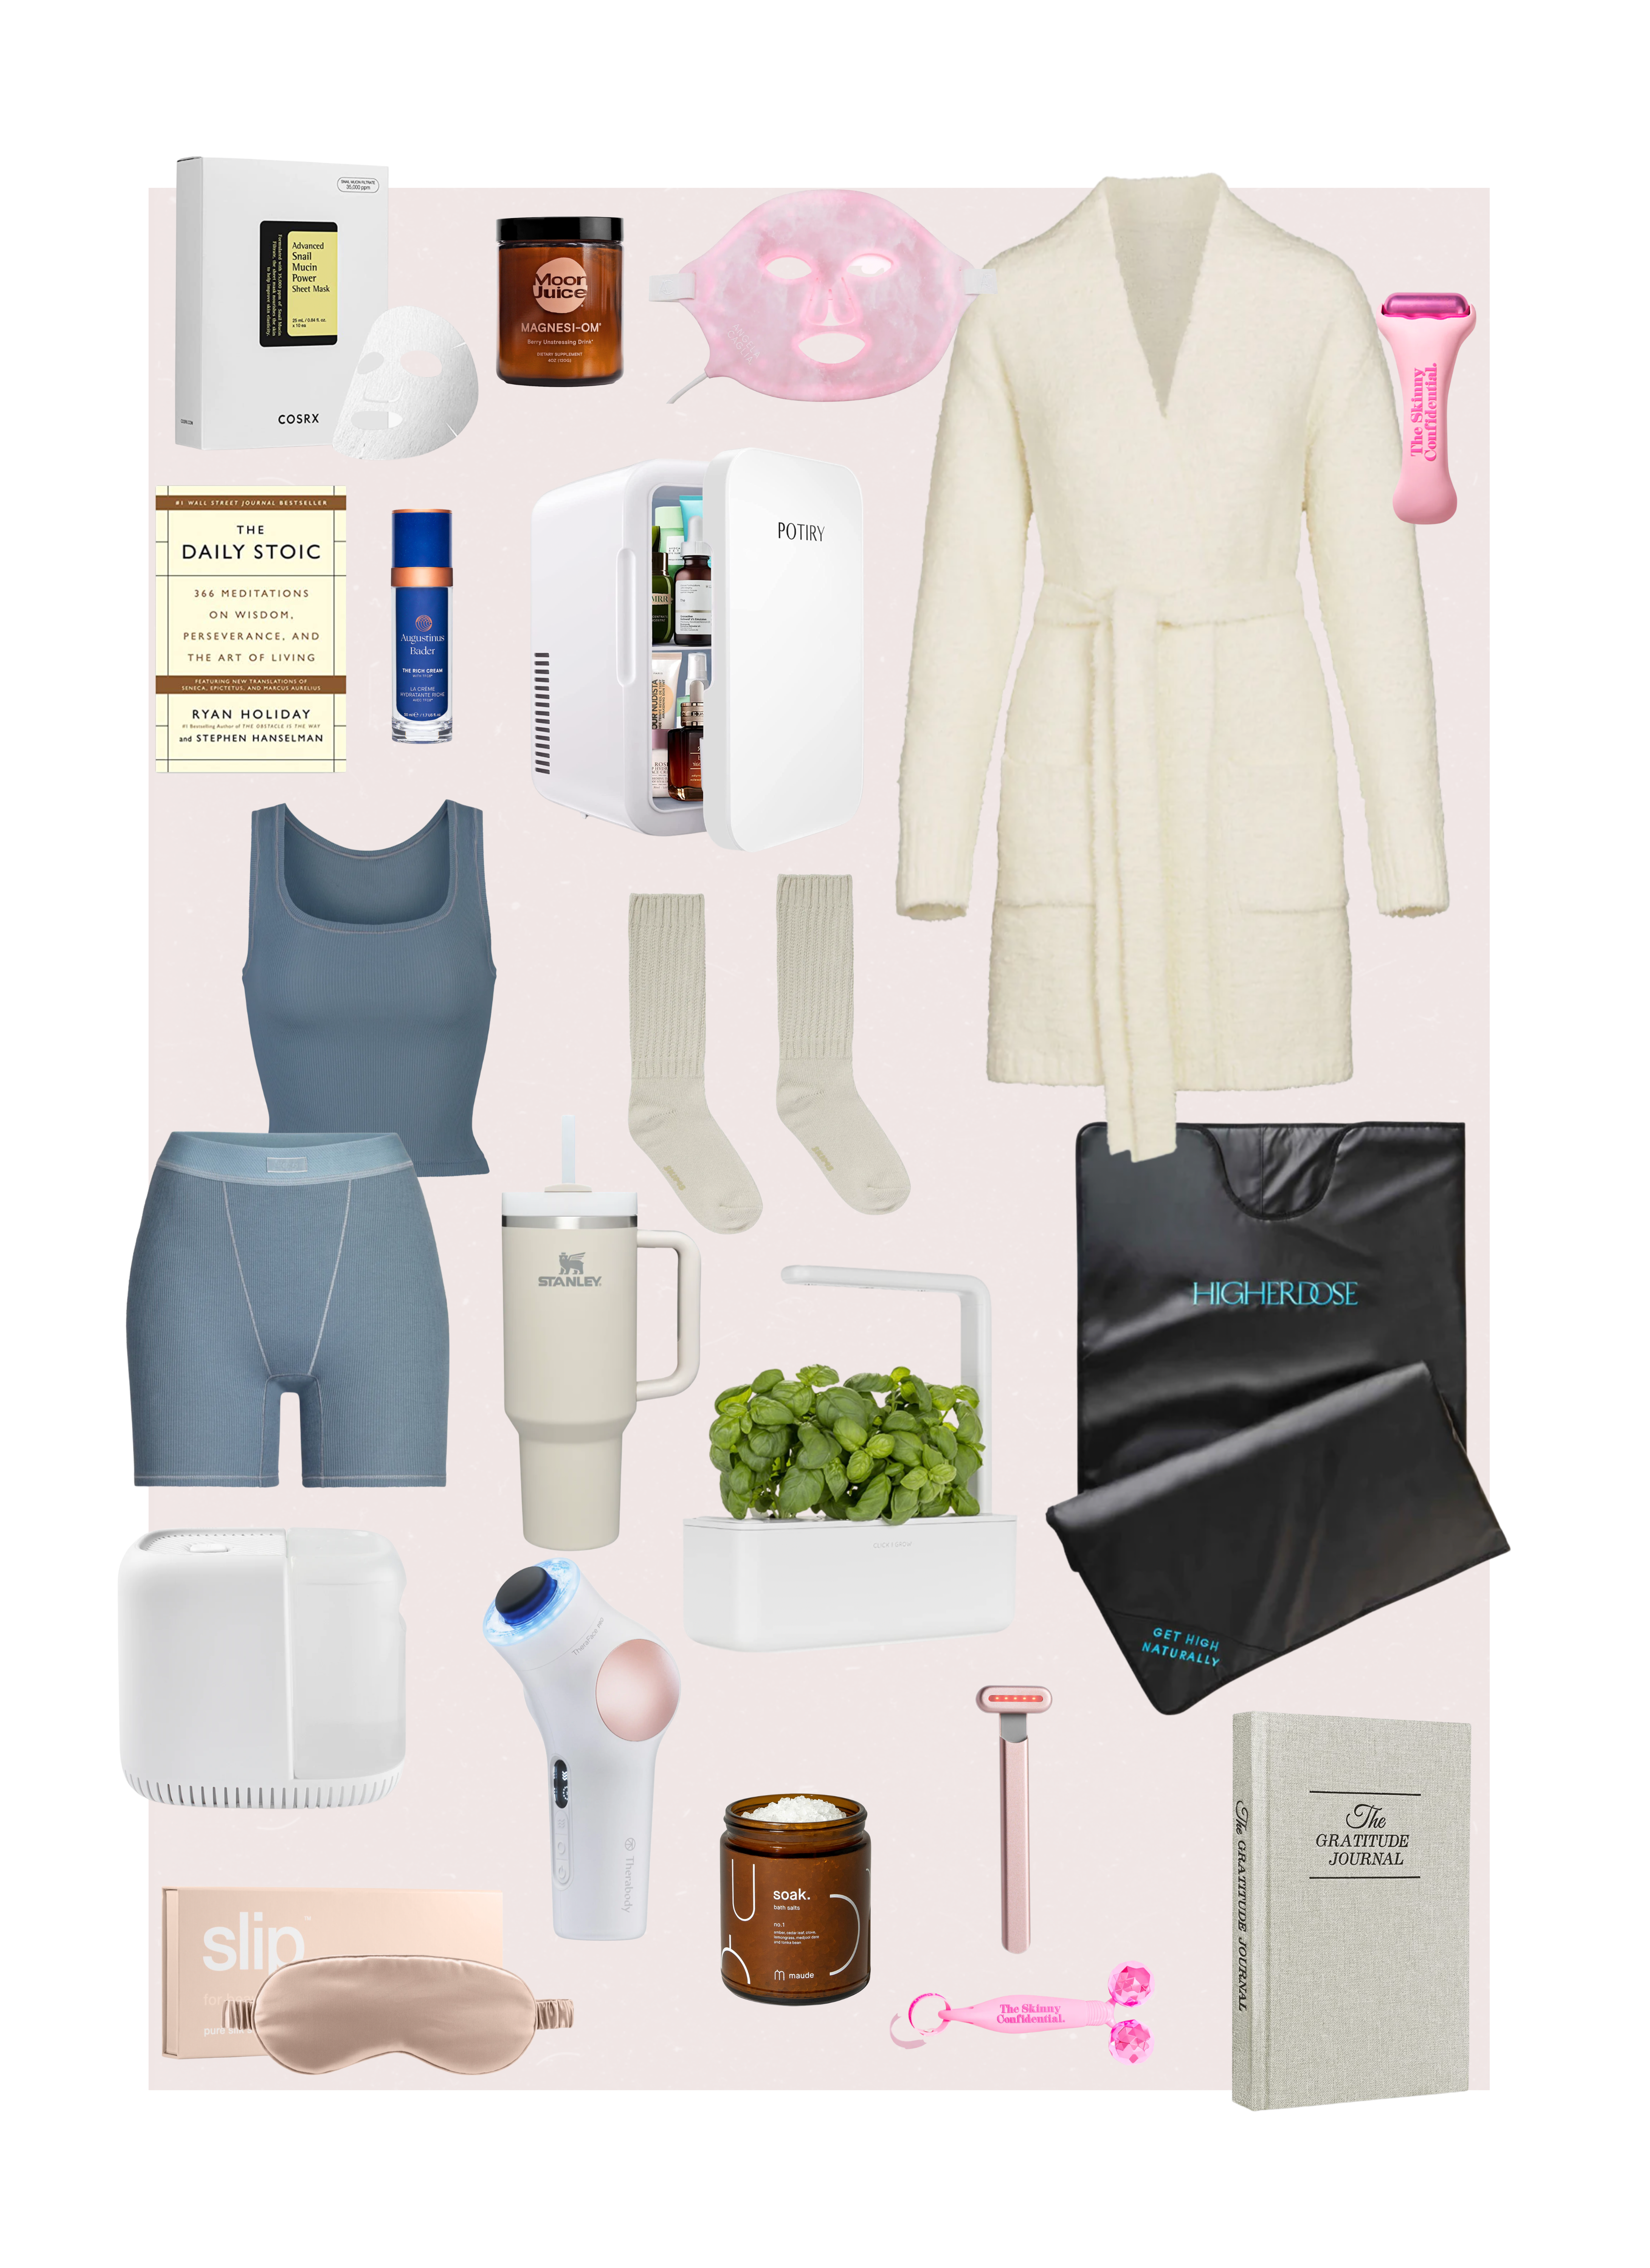 Gifts for the Self-Care Queen